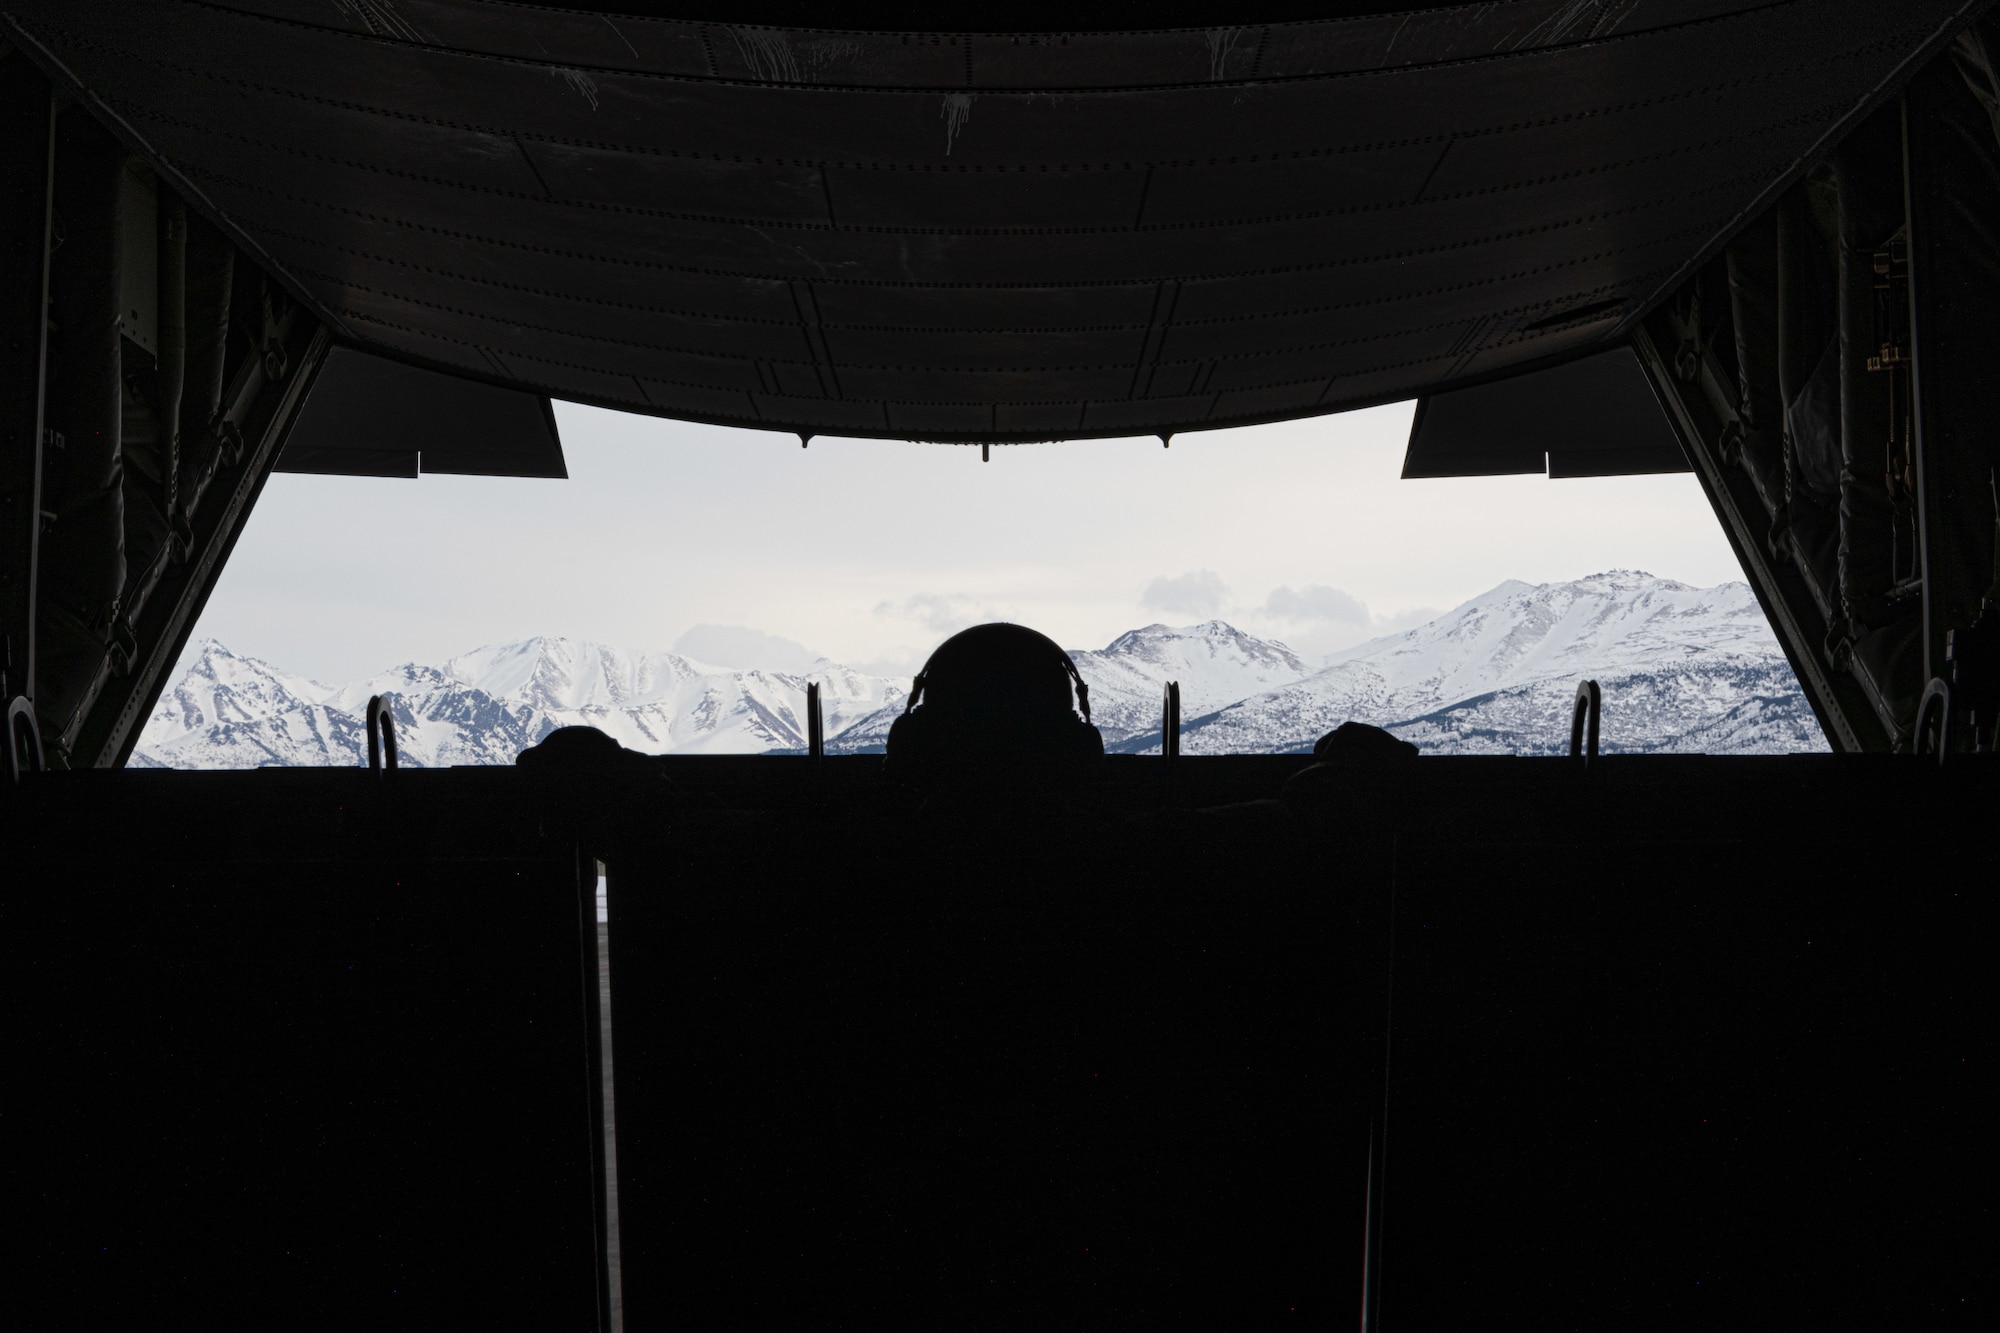 A U.S. Air Force Airman assigned to the 27th Special Operations Wing looks out the back of an MC-130J Commando II while taxiing during Arctic Edge 24 in Anchorage, Alaska, Feb. 21, 2024. Arctic Edge is an annual defense exercise designed to demonstrate that our forces are engaged, postured, and ready to assure, deter, and defend the U.S. and Canada in an increasingly complex Arctic security environment. (U.S. Air Force photo by Senior Airman Drew Cyburt)